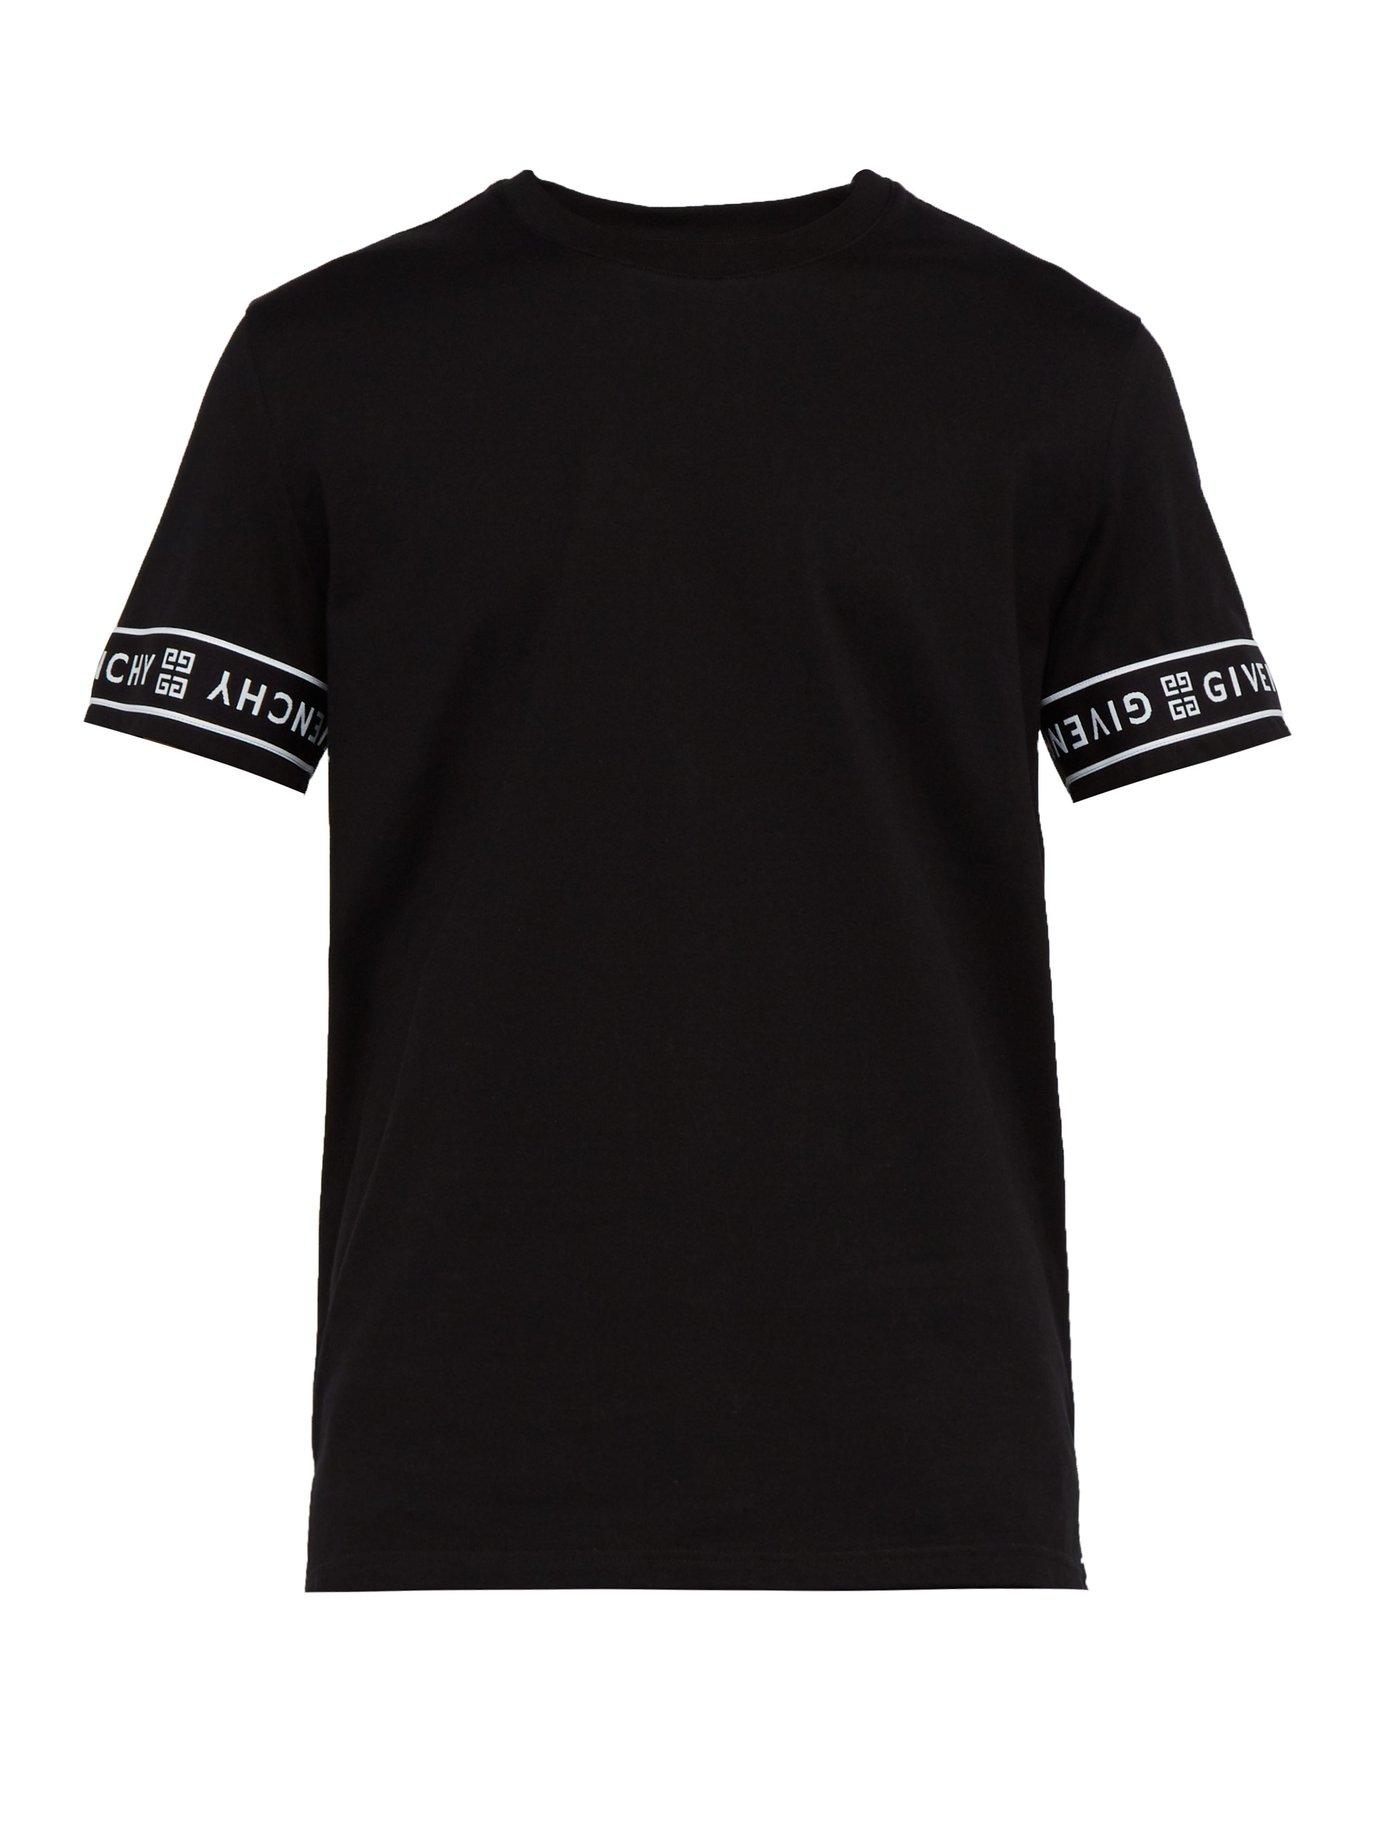 Givenchy Logo Jacquard Cotton T Shirt in Black for Men - Lyst